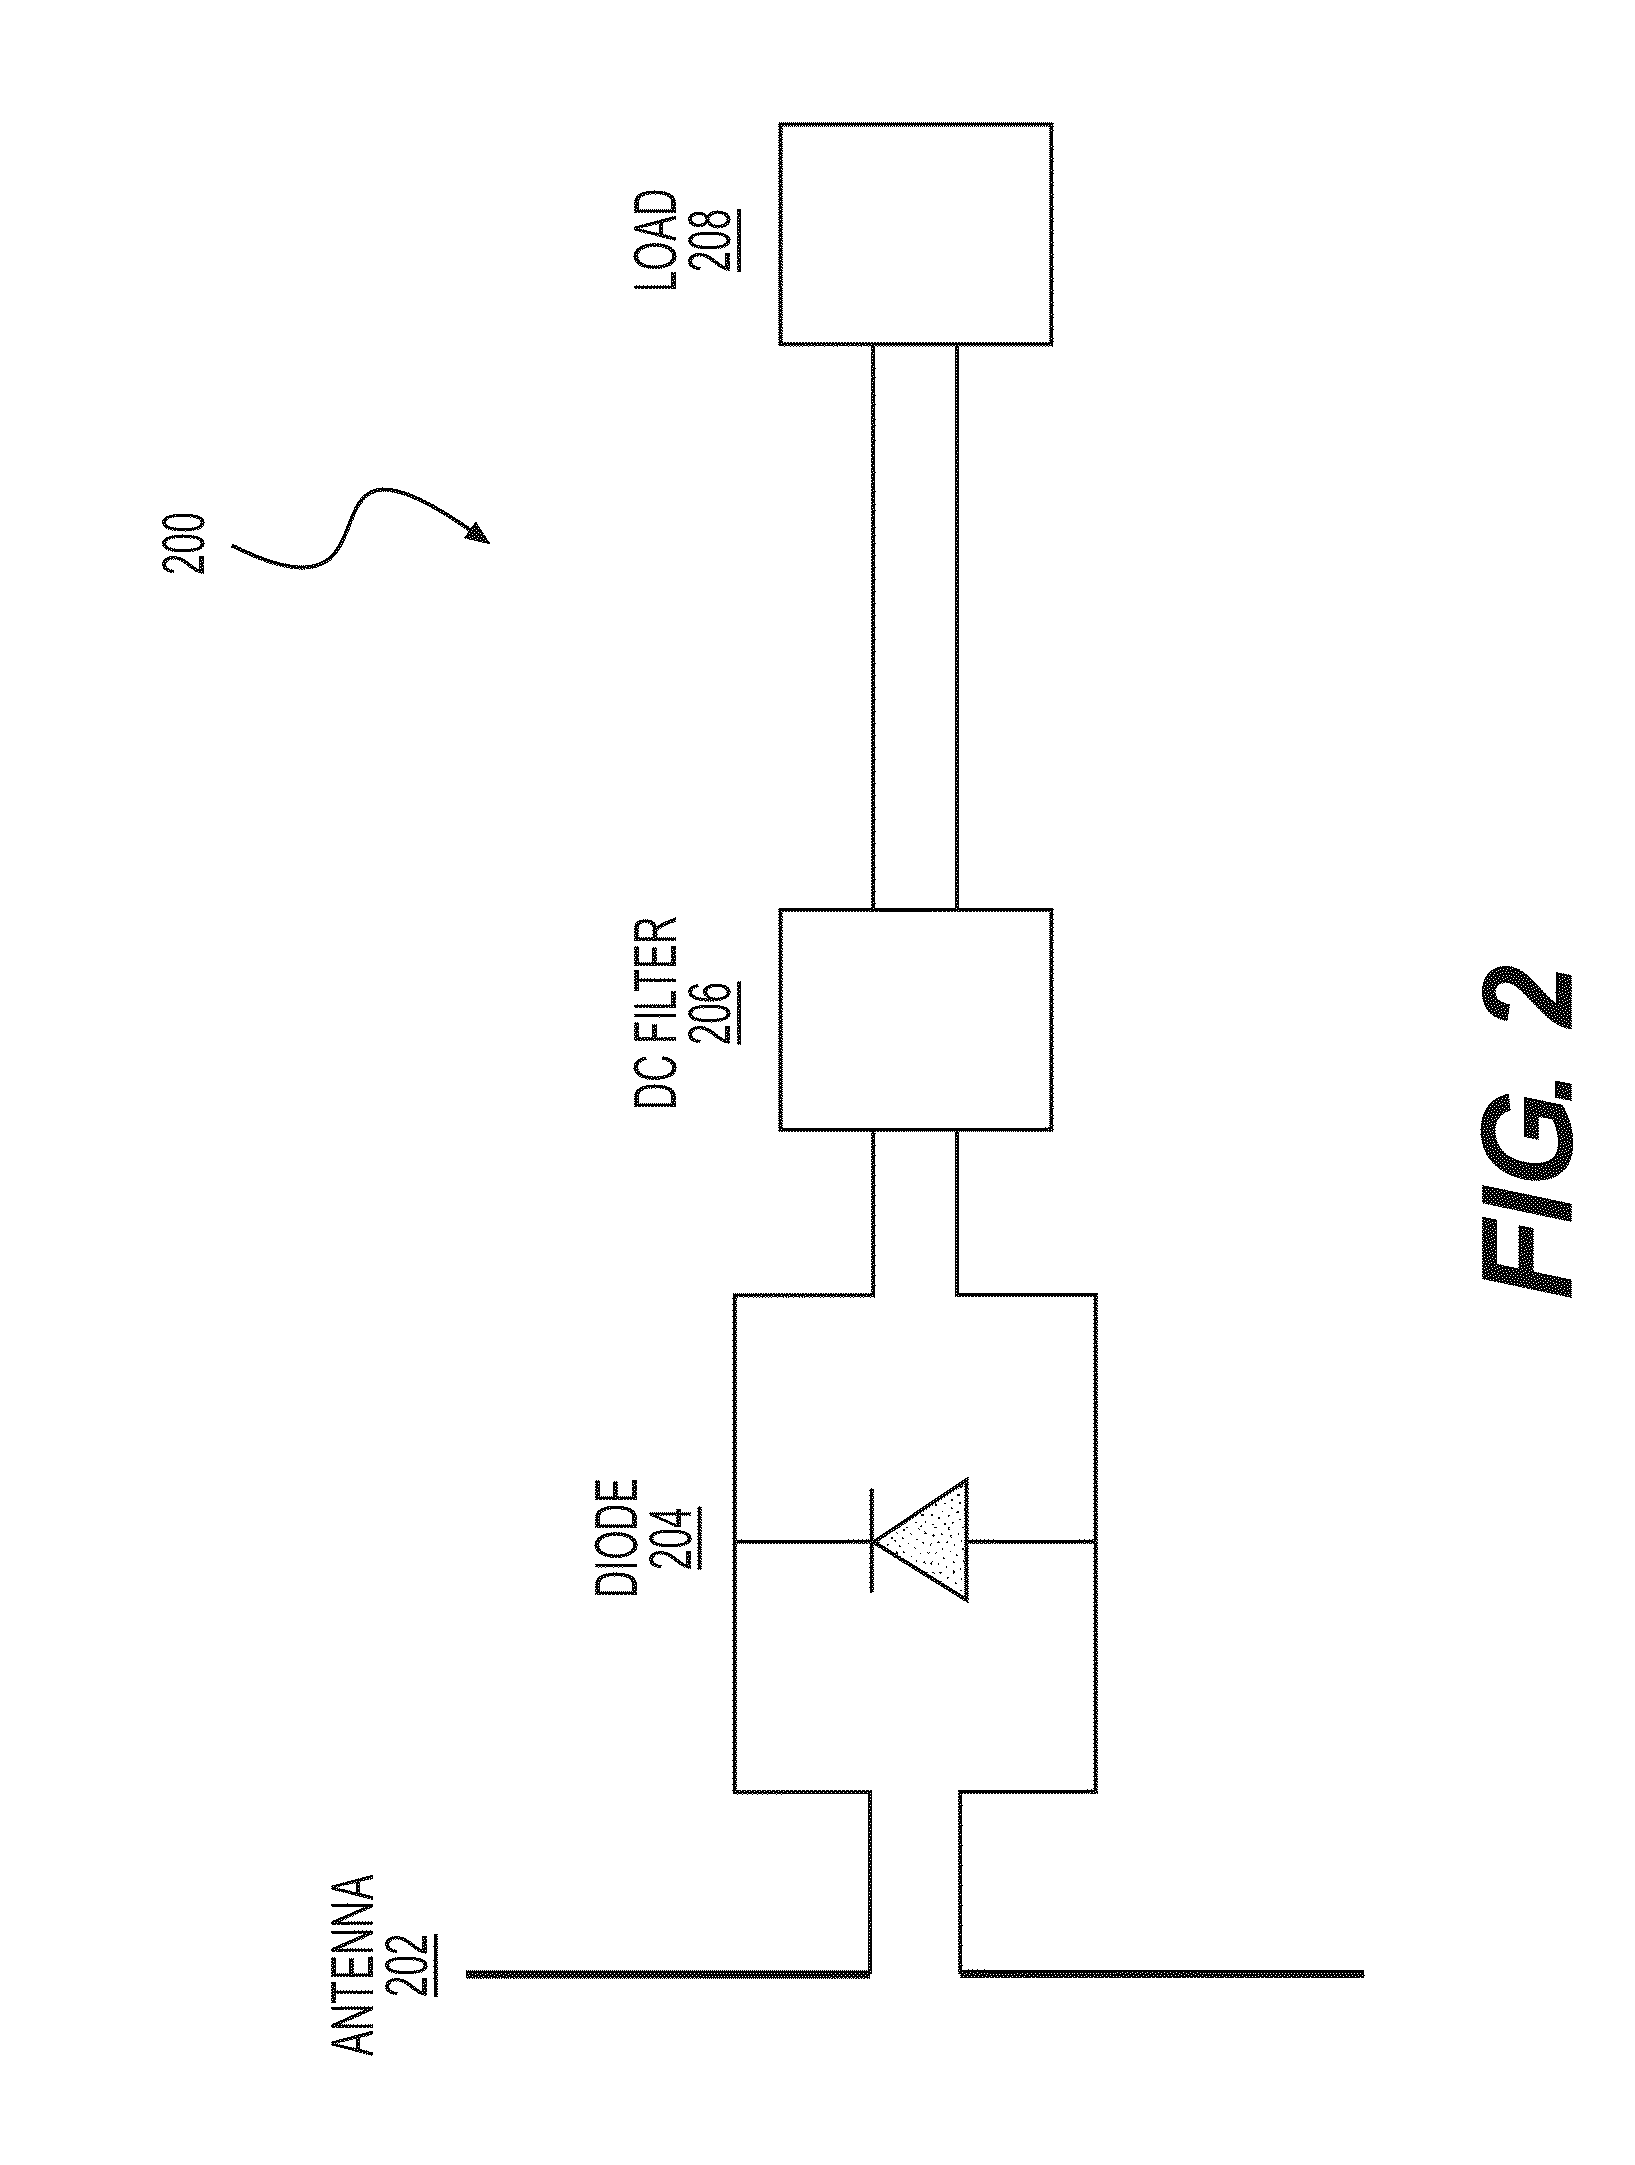 System and Method for Identifying Materials Using a THz Spectral Fingerprint in a Media with High Water Content